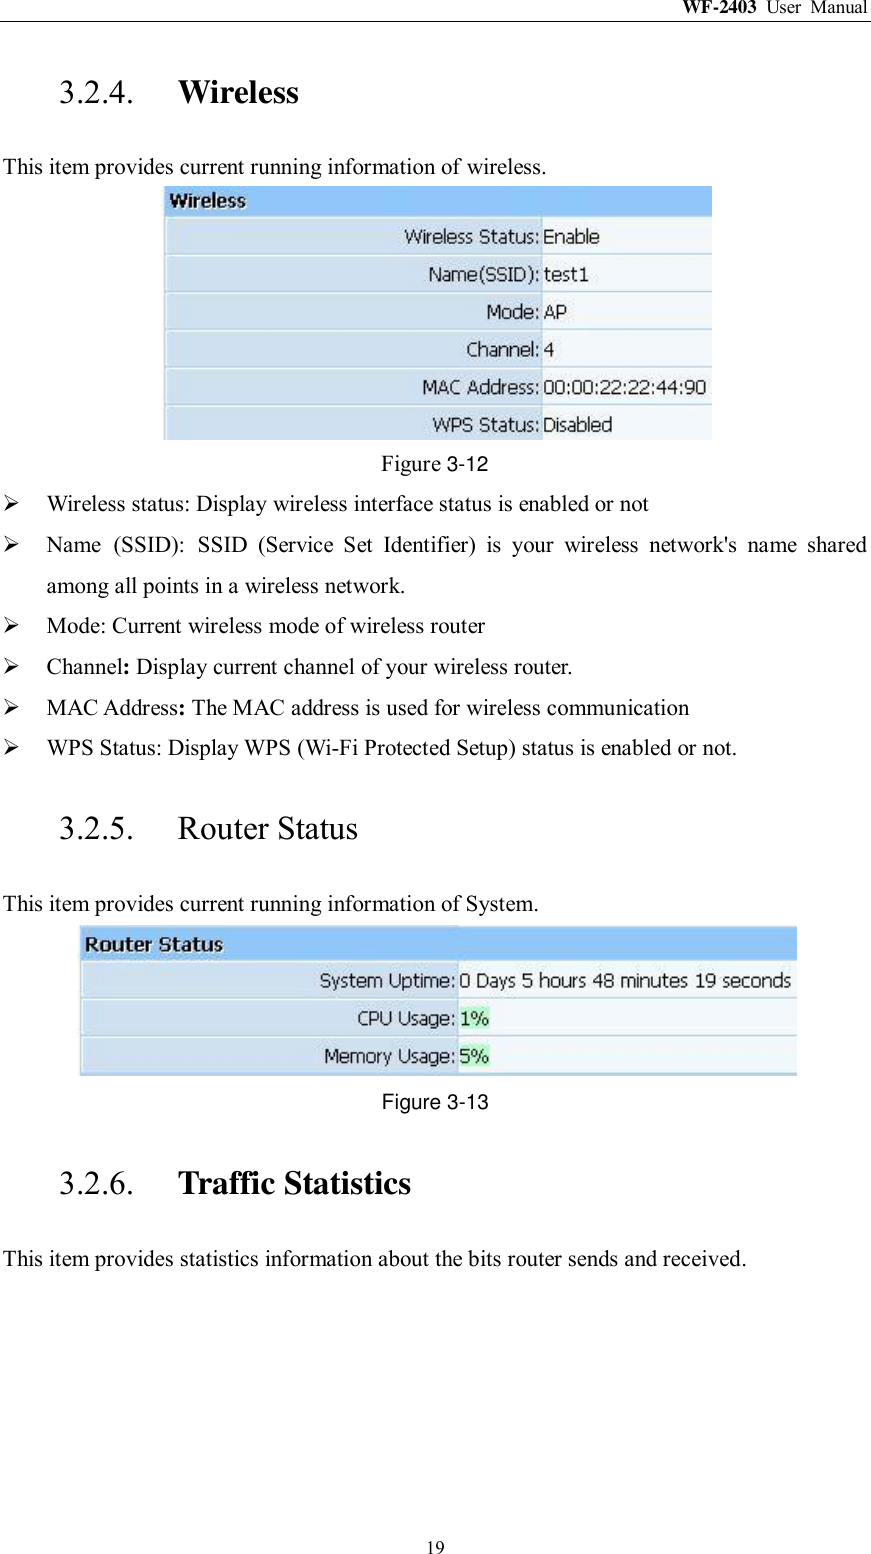 WF-2403  User  Manual  19 3.2.4. Wireless This item provides current running information of wireless.  Figure 3-12  Wireless status: Display wireless interface status is enabled or not  Name  (SSID):  SSID  (Service  Set  Identifier)  is  your  wireless  network&apos;s  name  shared among all points in a wireless network.  Mode: Current wireless mode of wireless router    Channel: Display current channel of your wireless router.  MAC Address: The MAC address is used for wireless communication  WPS Status: Display WPS (Wi-Fi Protected Setup) status is enabled or not. 3.2.5. Router Status This item provides current running information of System.  Figure 3-13 3.2.6. Traffic Statistics This item provides statistics information about the bits router sends and received. 